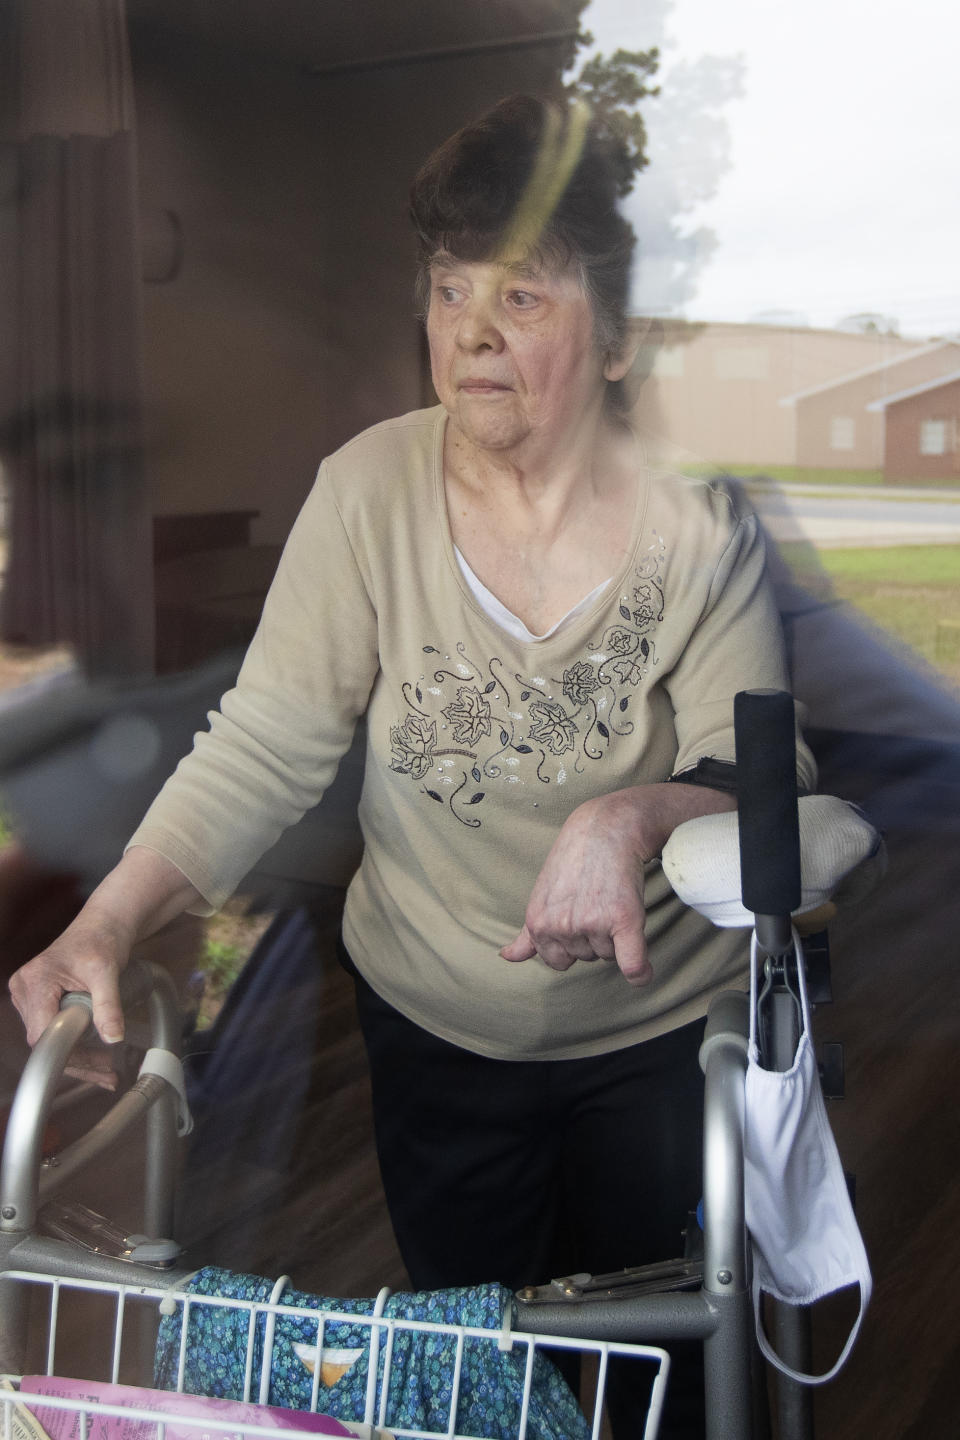 Southern Pines nursing home resident Judy Morey is seen through the window of her room during an interview in Warner Robins, Ga., on Thursday, June 25, 2020. Amid the coronavirus lockdown, she says she’s coping as best she can even as the days feel far longer than any that came before. “All I kind of want to do is taking naps all day long out of boredom,” she says. (AP Photo/John Bazemore)